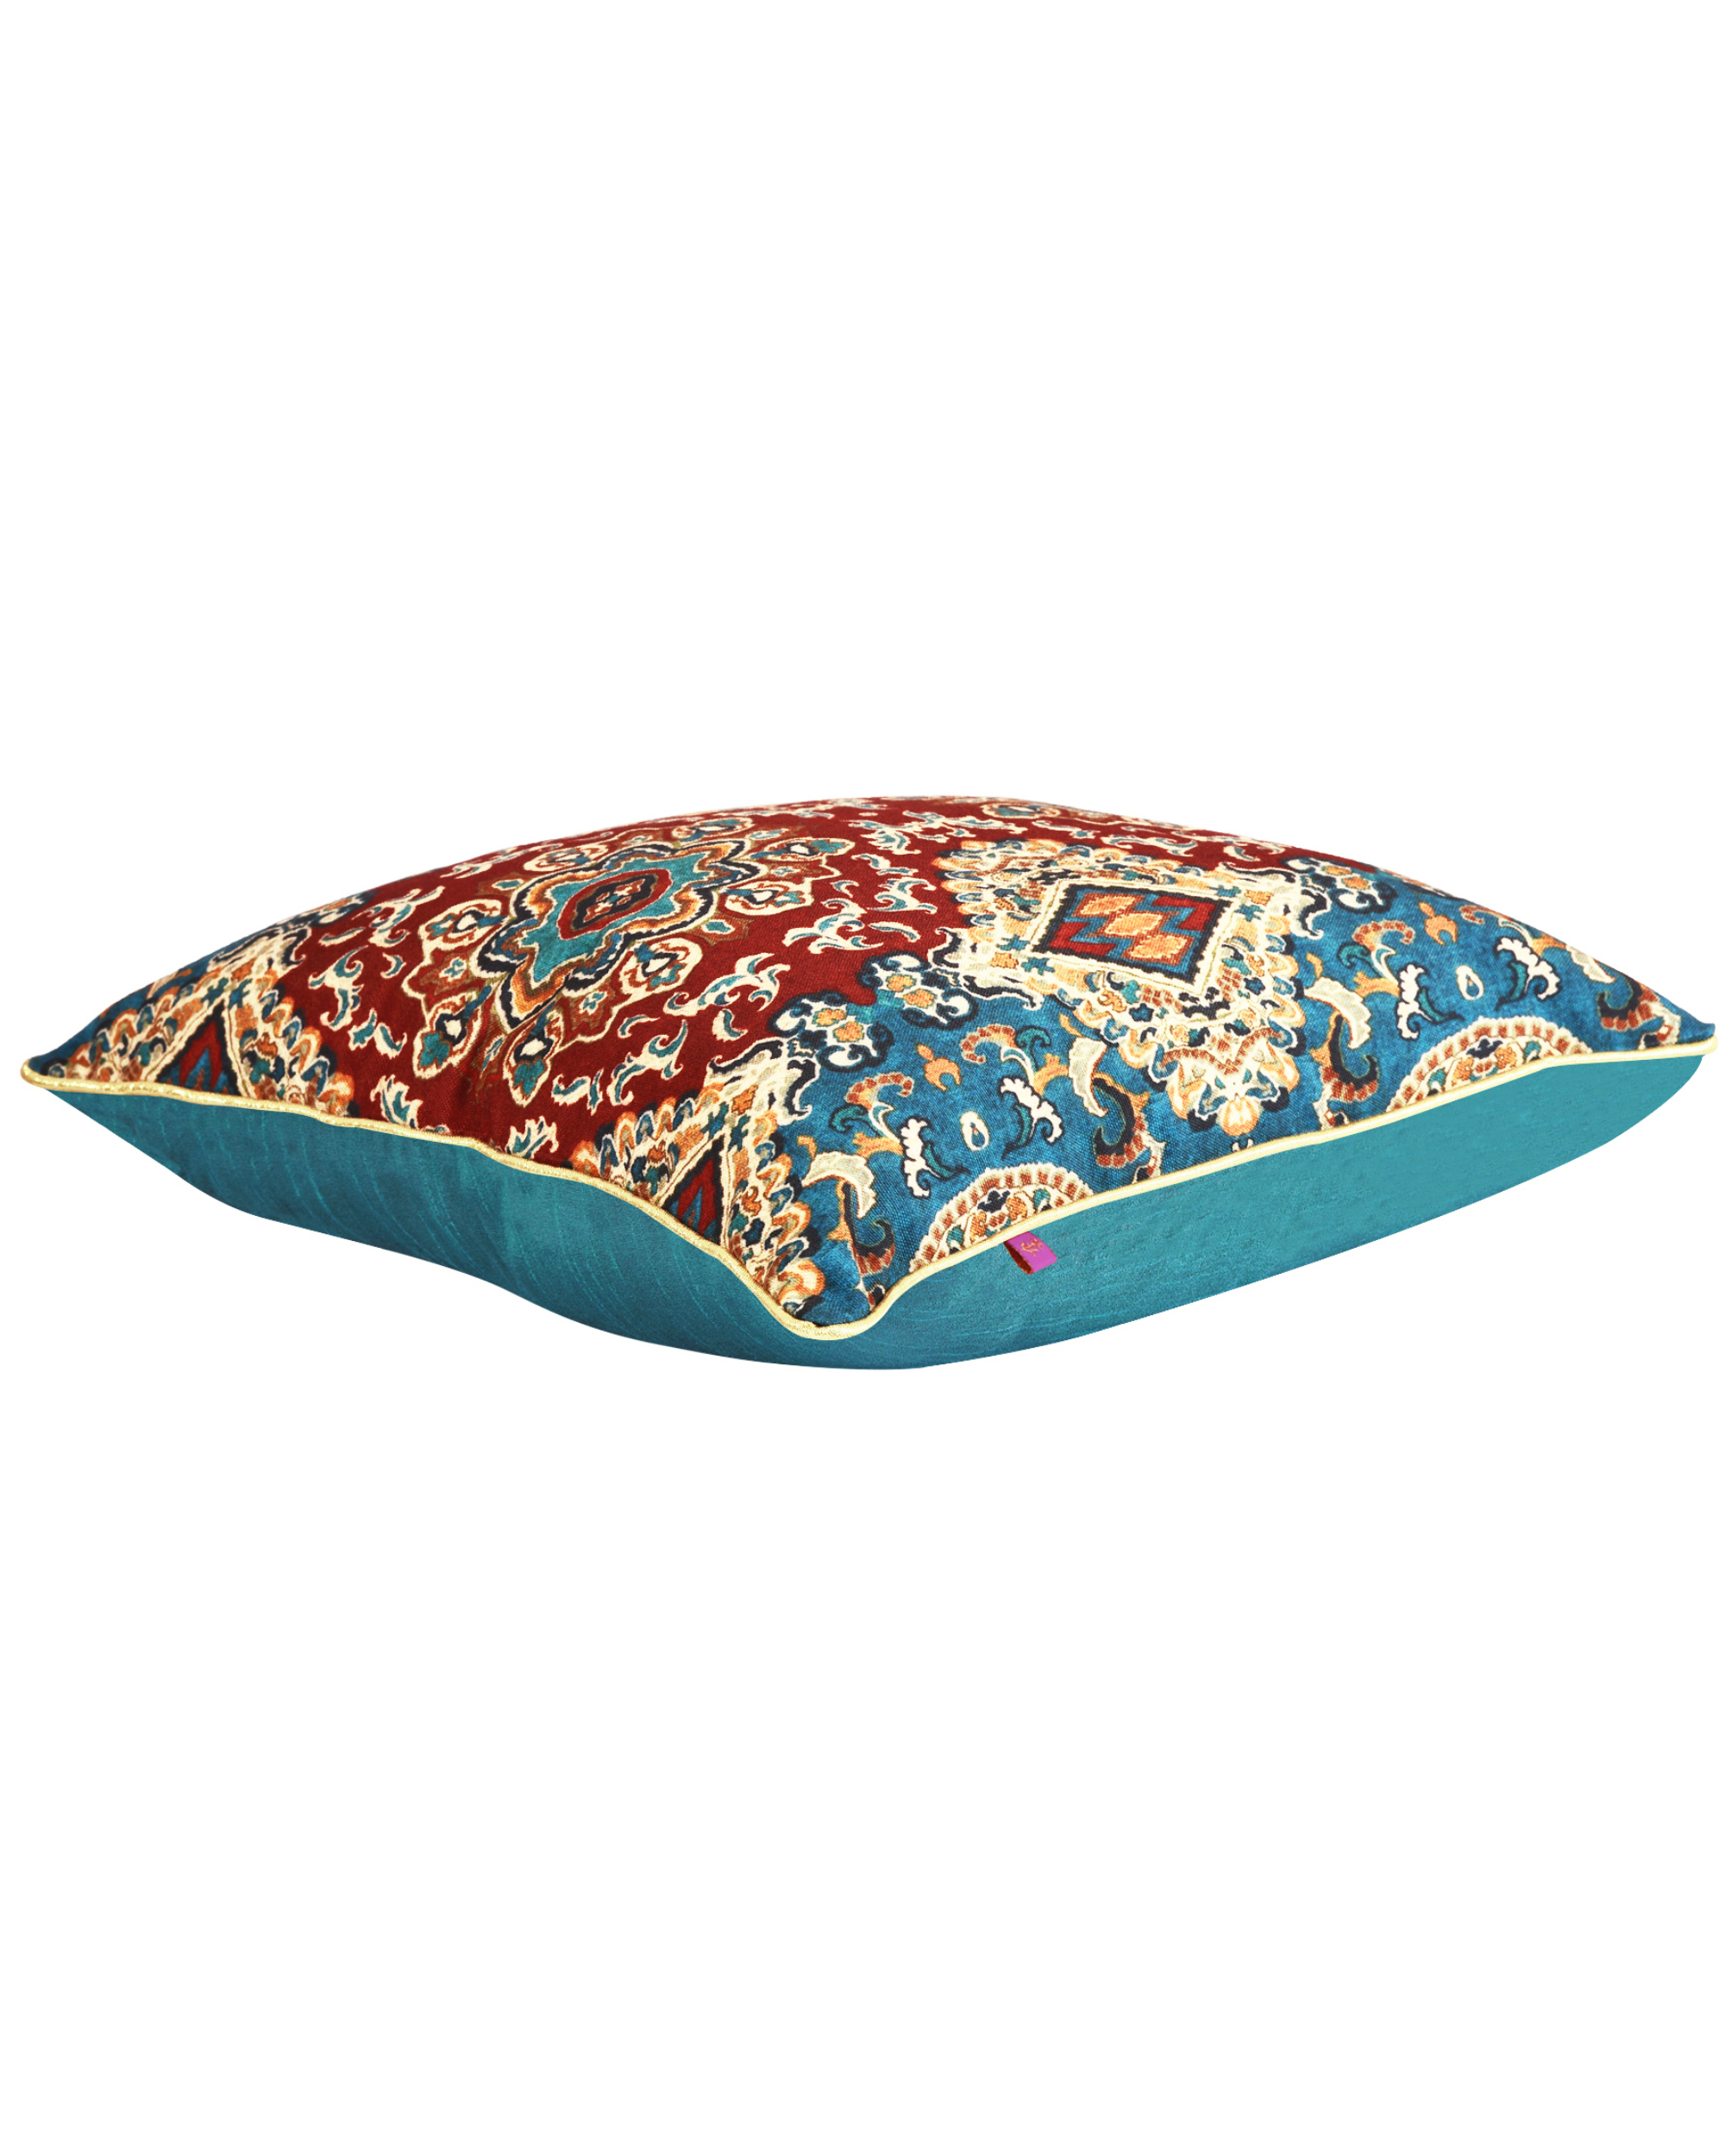 Persian rug print teal and red cotton canvas cushion cover by Oris Root ...